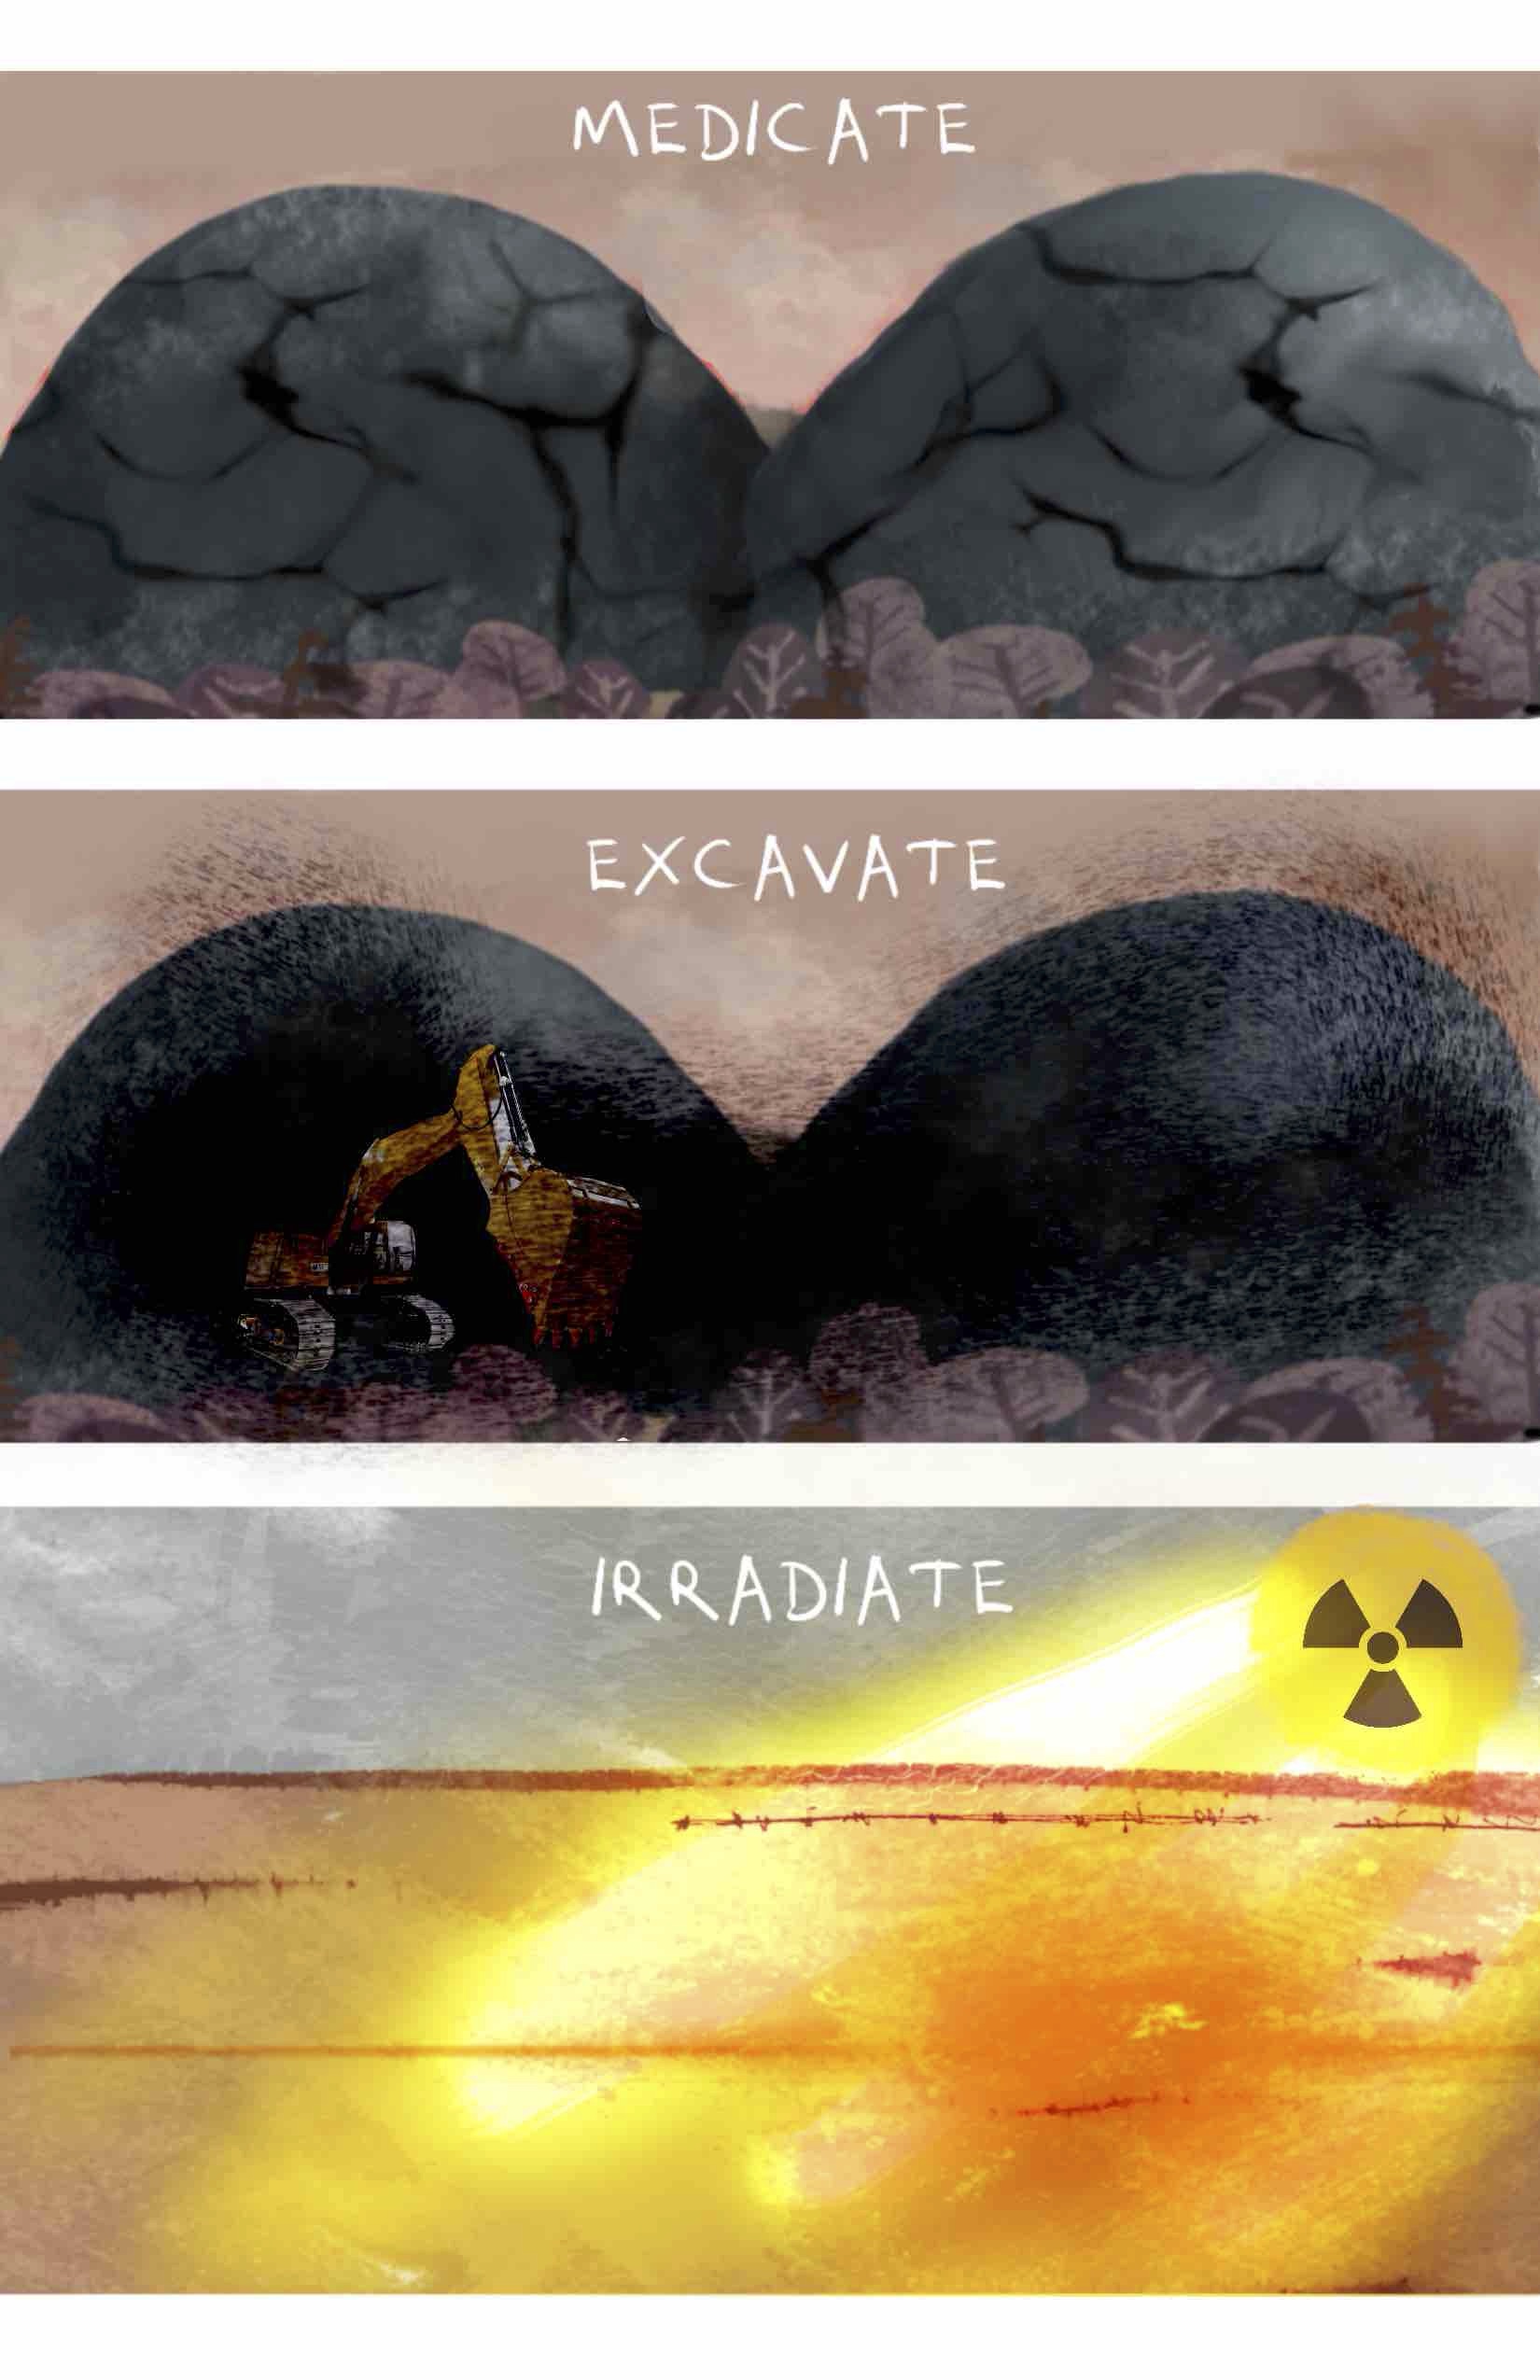 The mounds from the first page, dark gray and surrounded at their base by purple shrubs, stands tall but with a swirling, cloudy pattern. â€œMEDICATEâ€ A yellow excavator is digging into the base of the mounds, which are now dark, surrounded by clouds of dust. â€œEXCAVATEâ€ Where the mounds stood is now an empty desert. From above, like the sun, a yellow radiation symbol sends down beams of bright radiant light. â€œIRRADIATEâ€